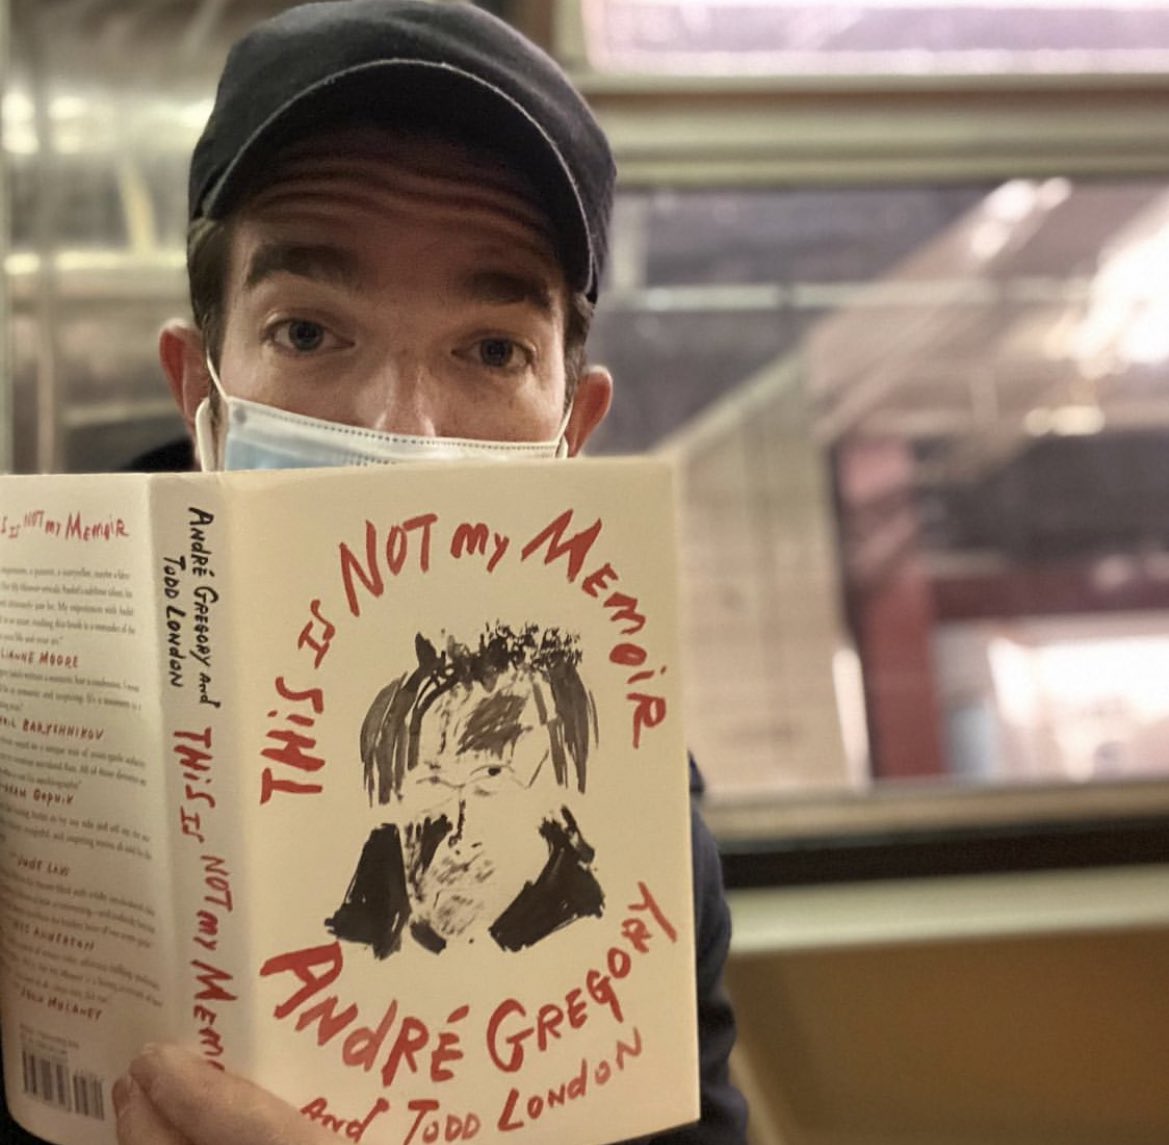 @mulaney reading “This Is Not My Memoir” by @TheAndreGregory & Todd London
#BookRecosFromCelebs #readmore #read #book #reading #author #johnmulaney #thisisnotmymemoir #andregregory #toddlondon #kidgorgeous #SNL #menwhoread #documentarynow #spiderman #intothespiderverse